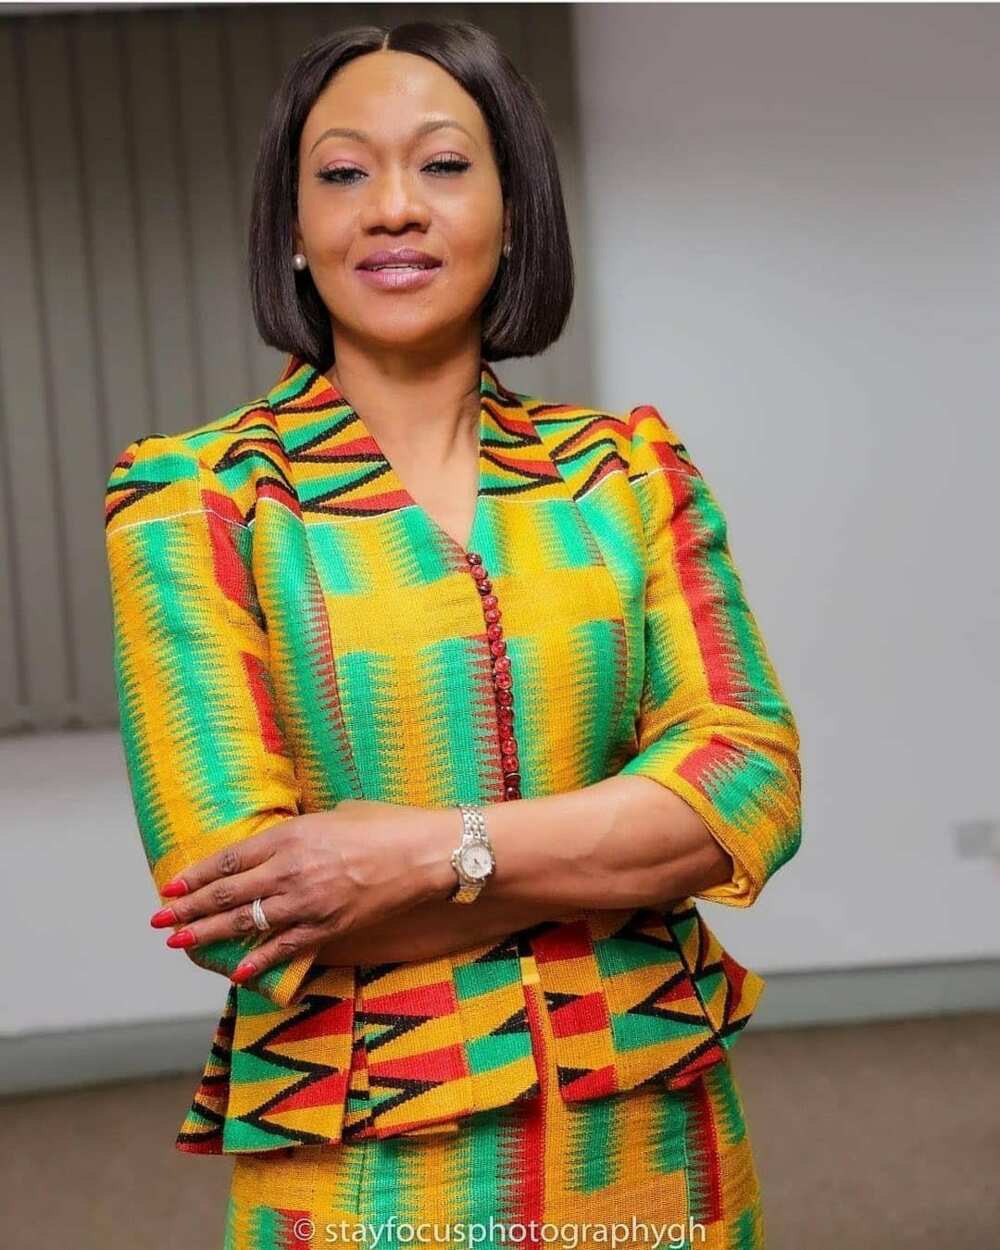 6 photos of competent EC boss Jean Mensa which show she is the definition of beauty with brains